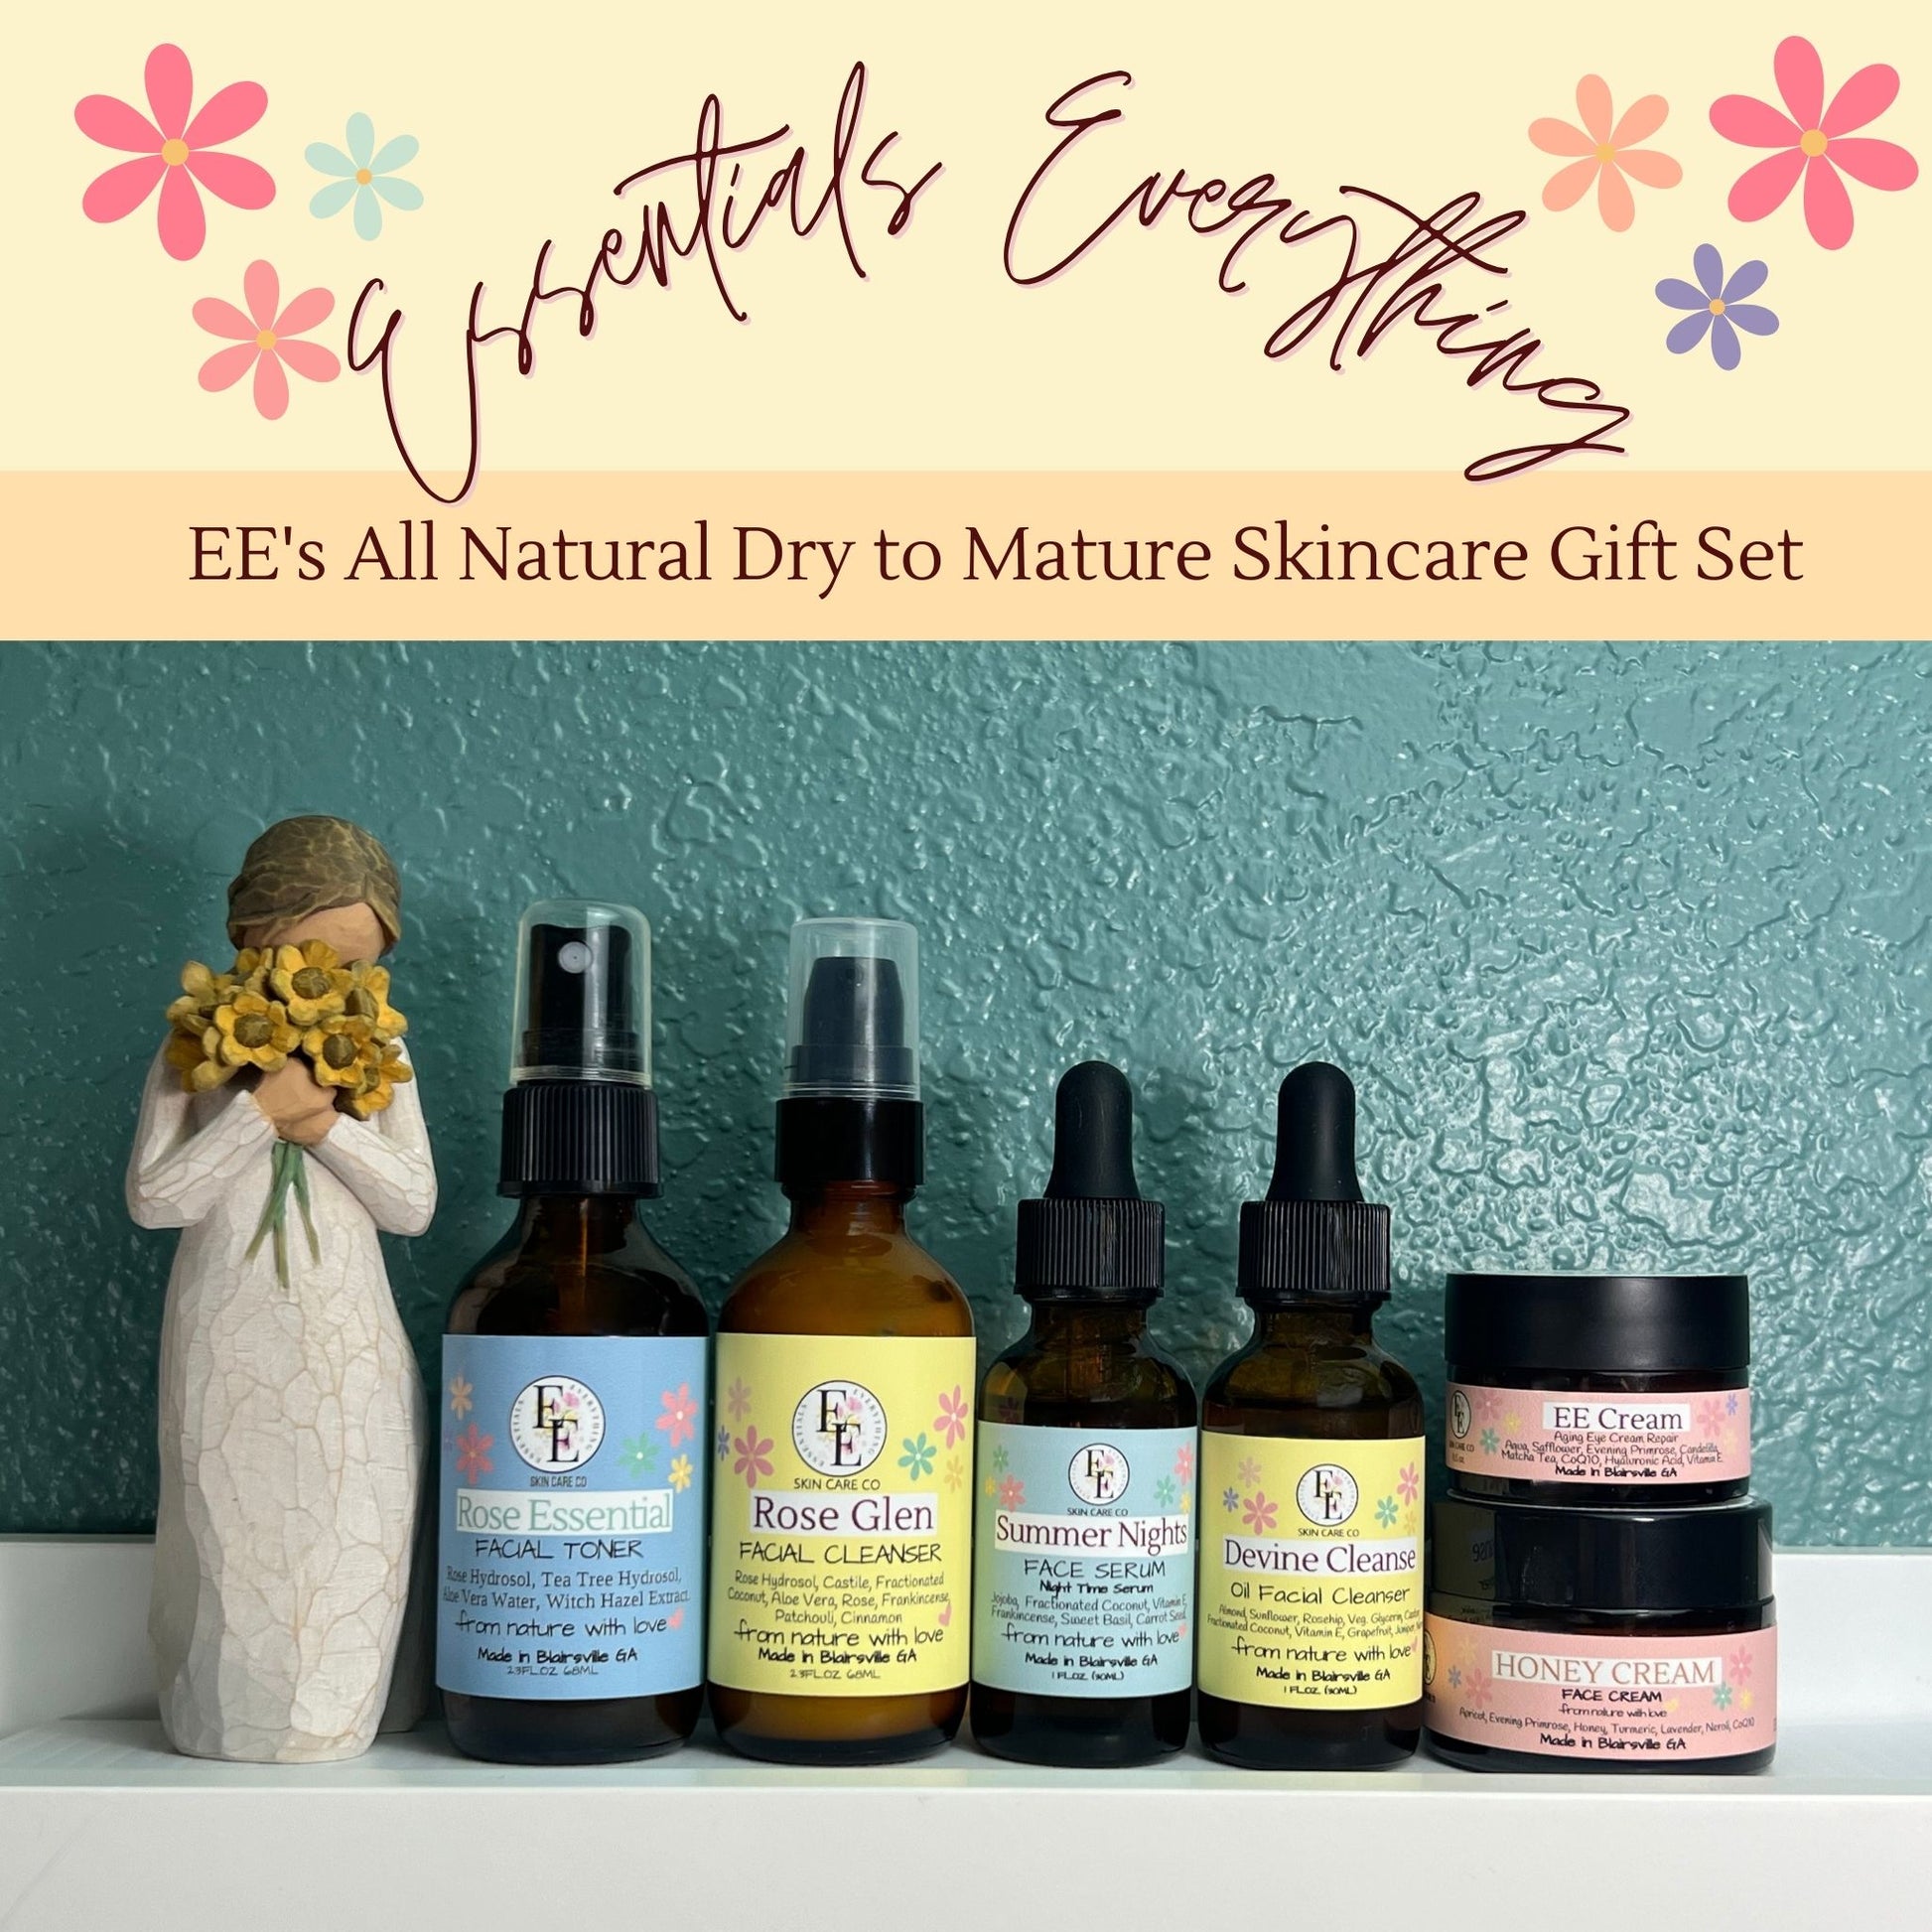 All Natural Dry to Mature Skin Care Set by Essentials Everything Skin Care Co.